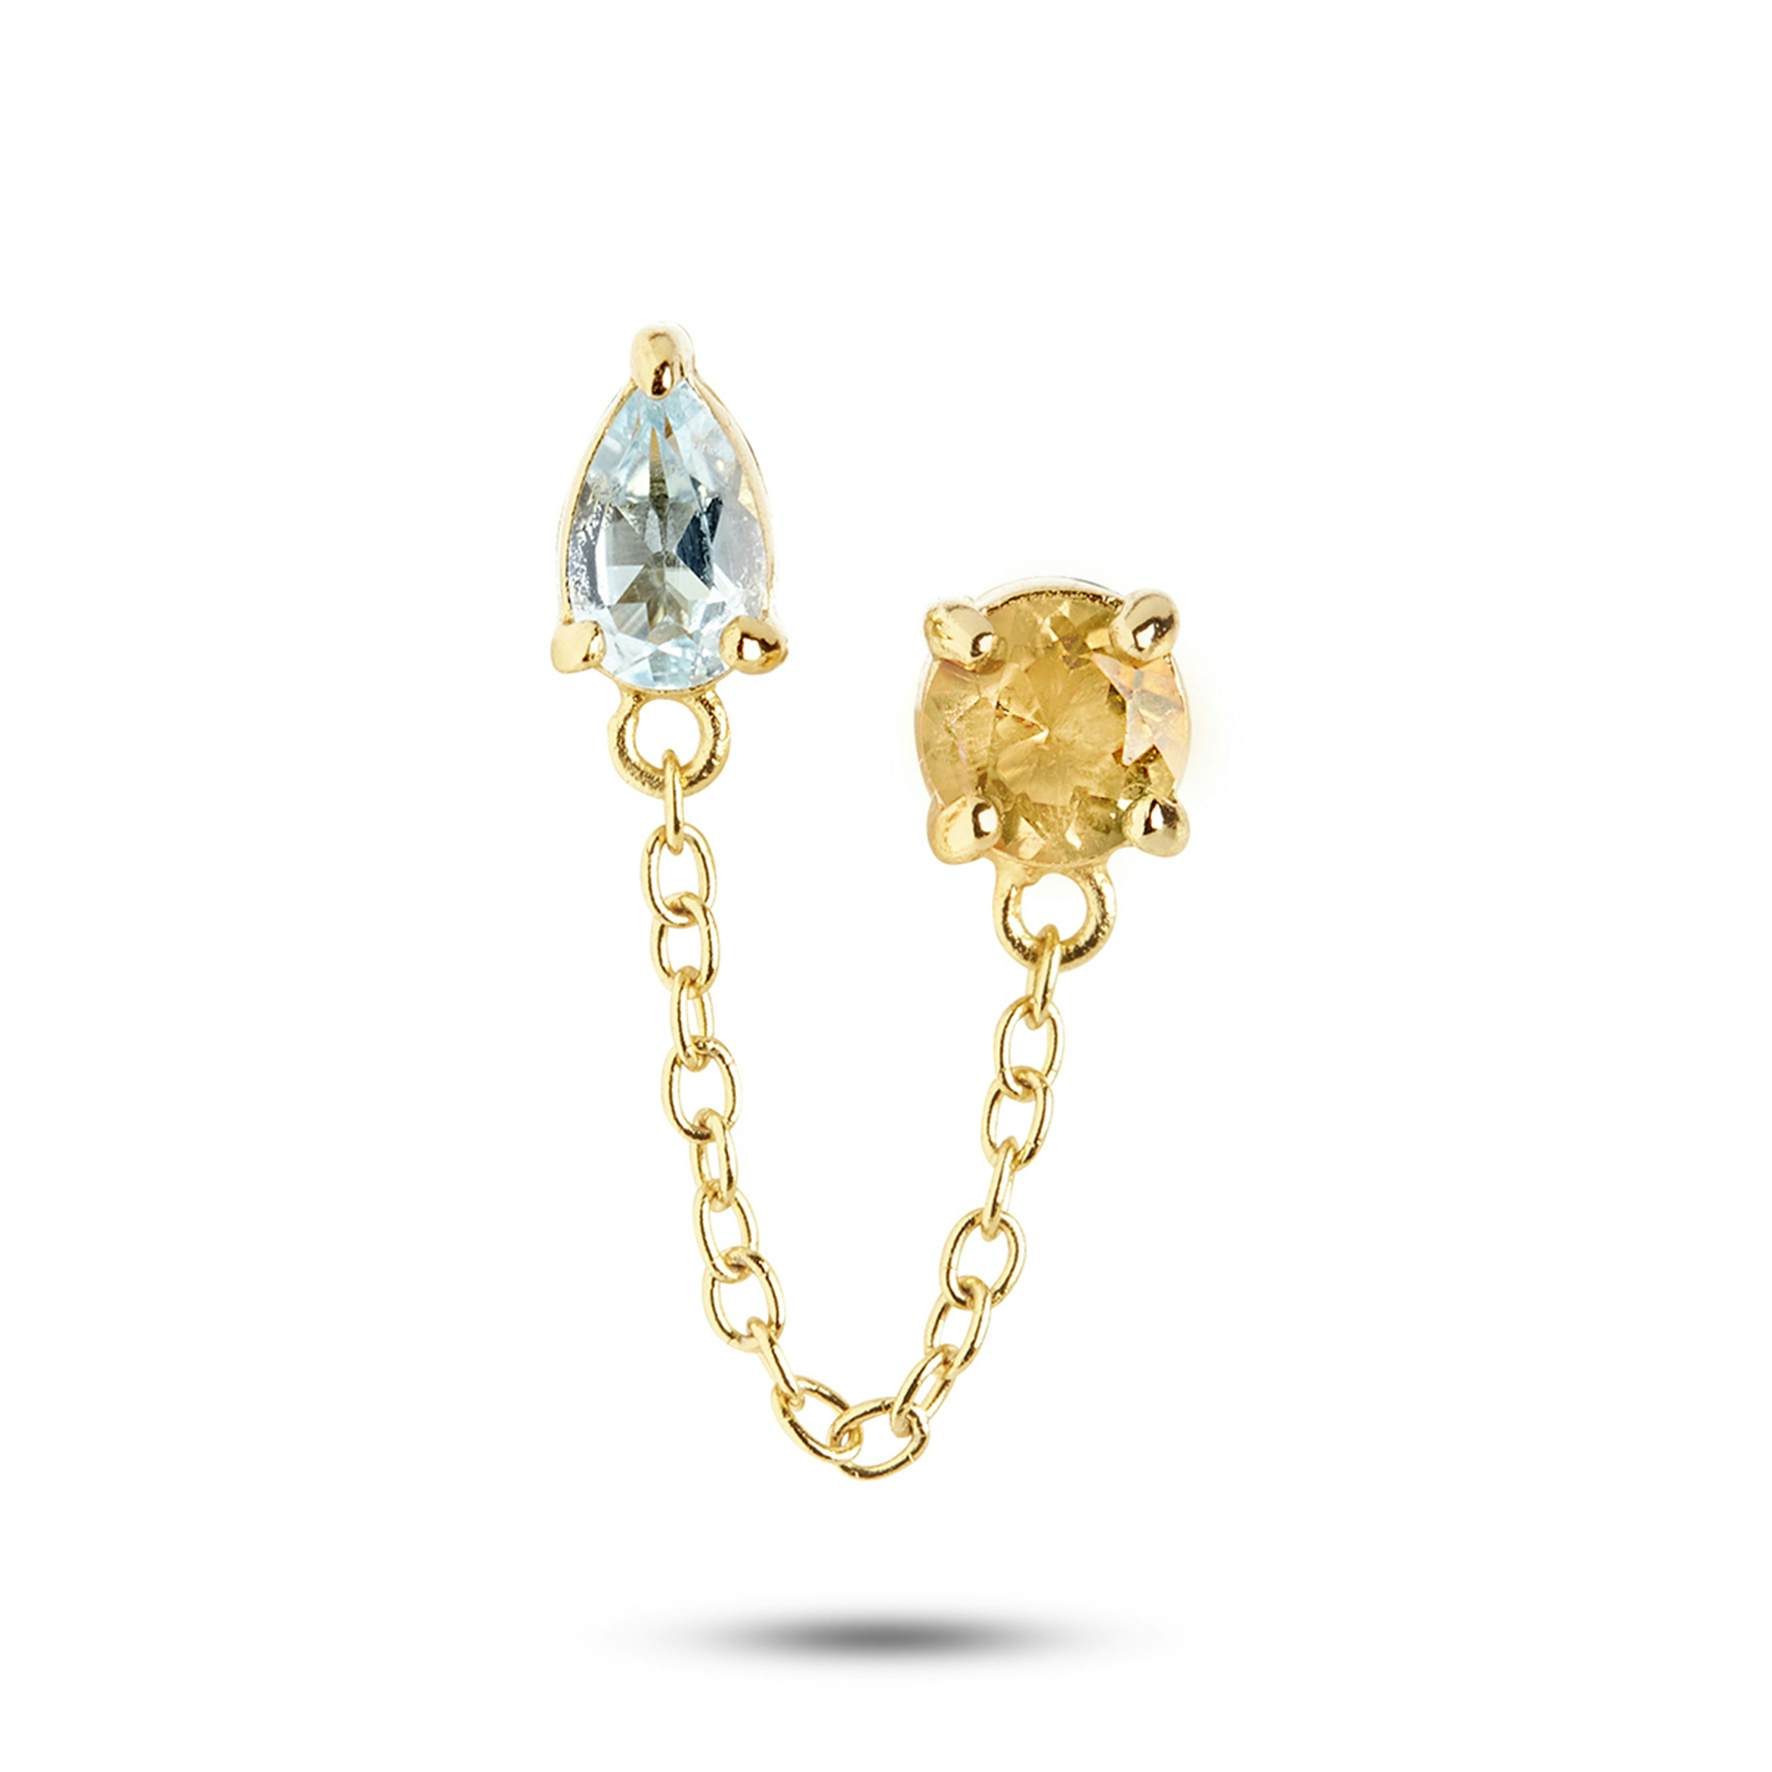 Gem Candy Chain Earstick Aqua from Carré in Goldplated-Silver Sterling 925|, 